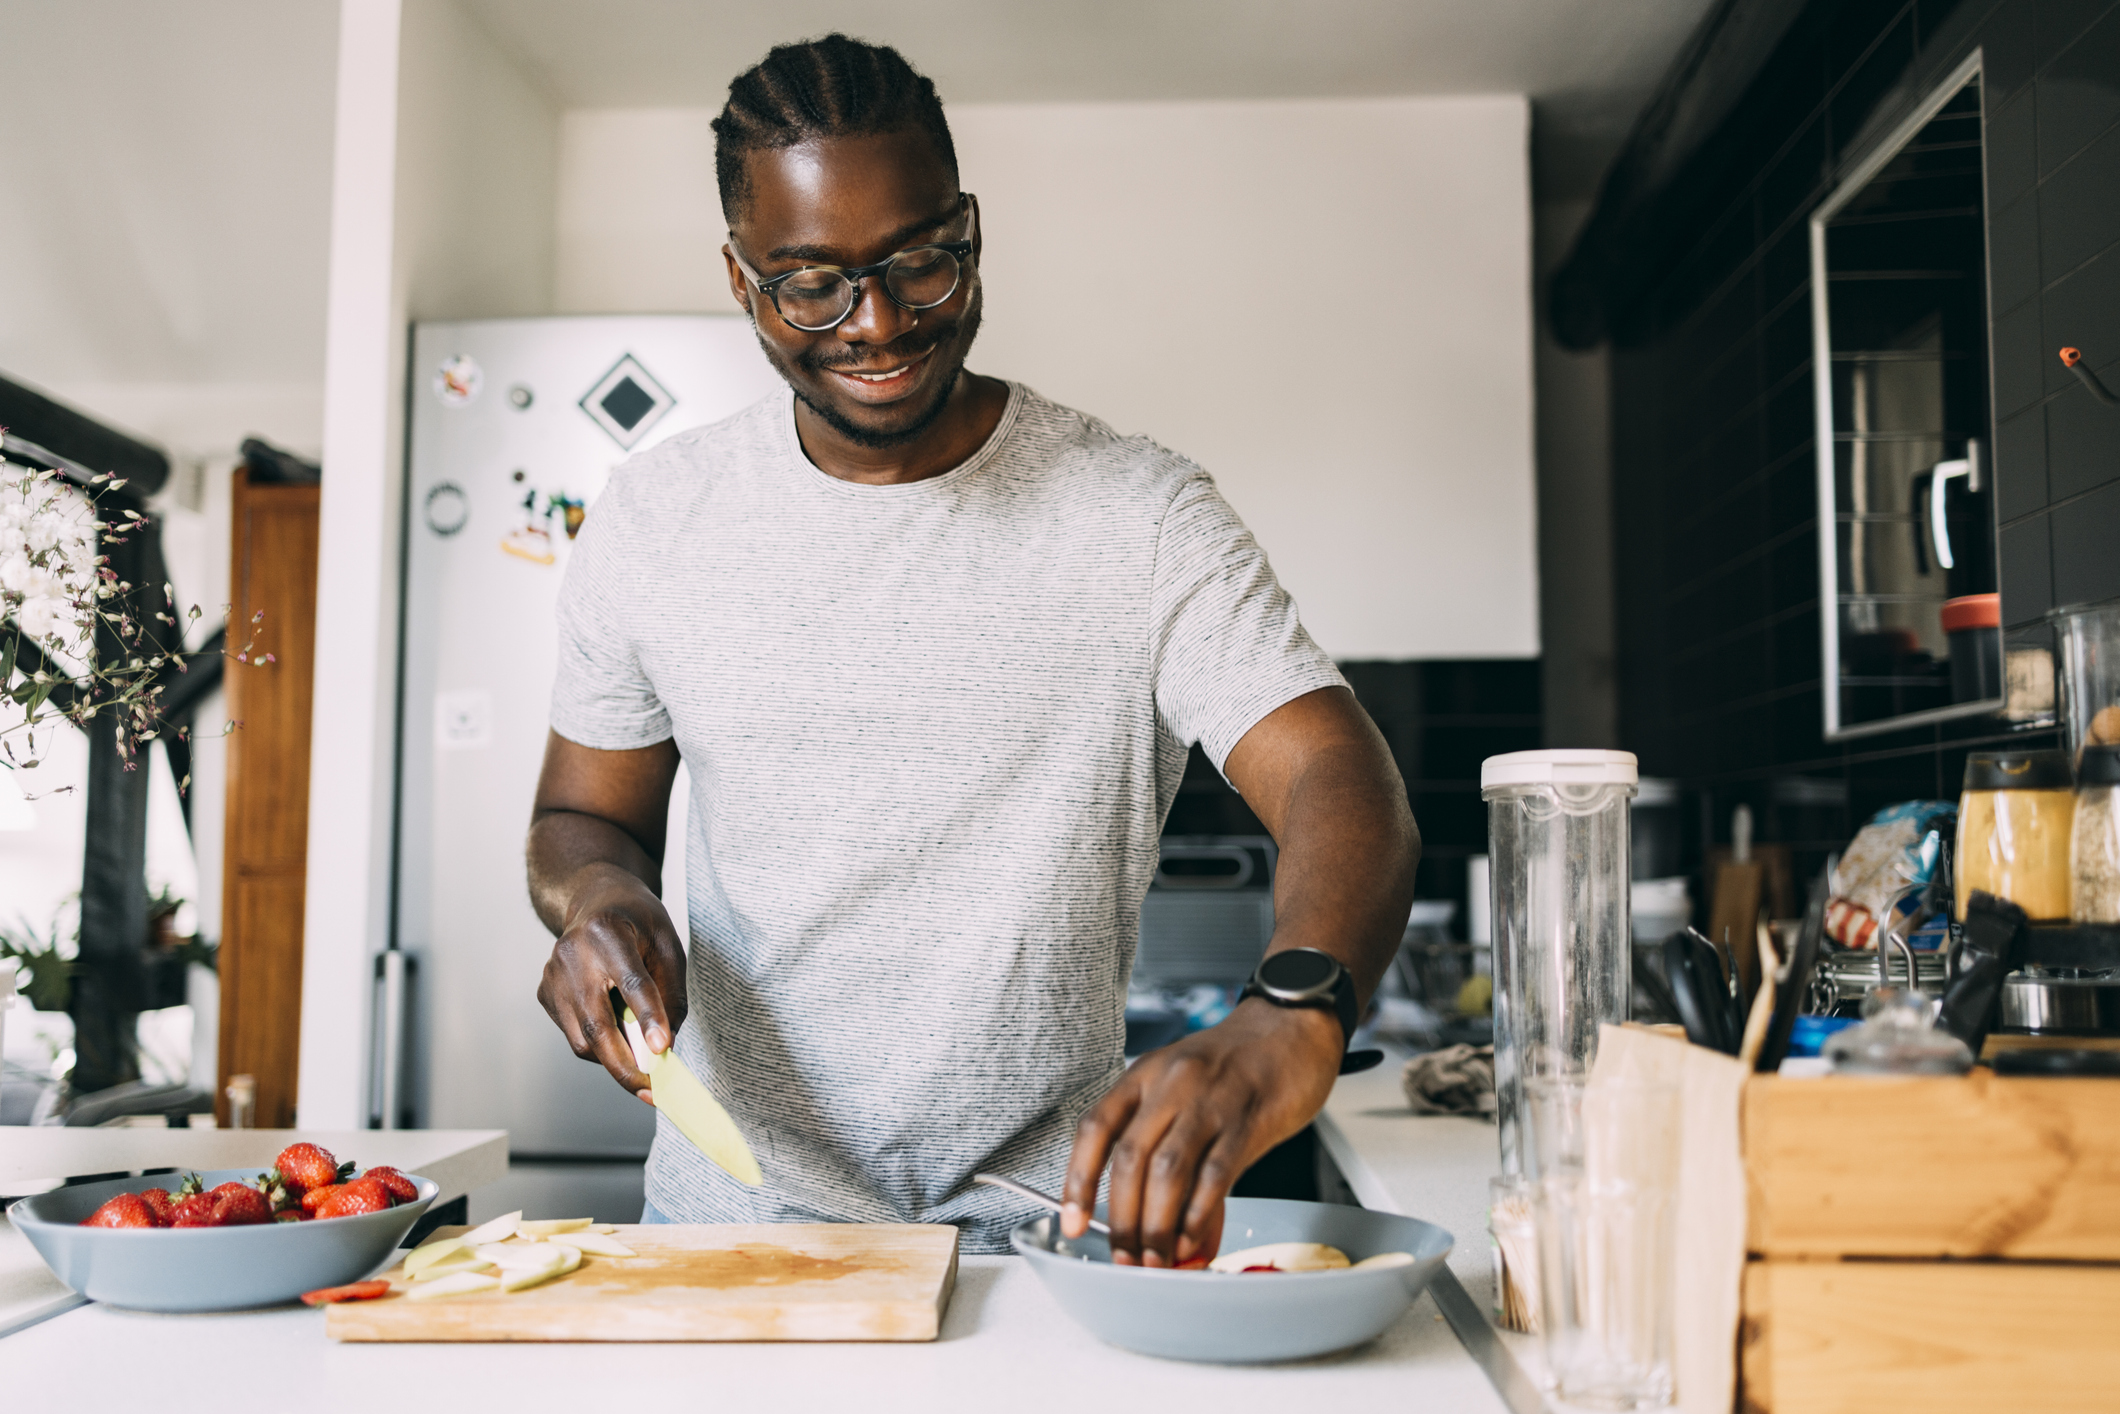 A smiling African-American male cutting fruit while making a healthy meal.